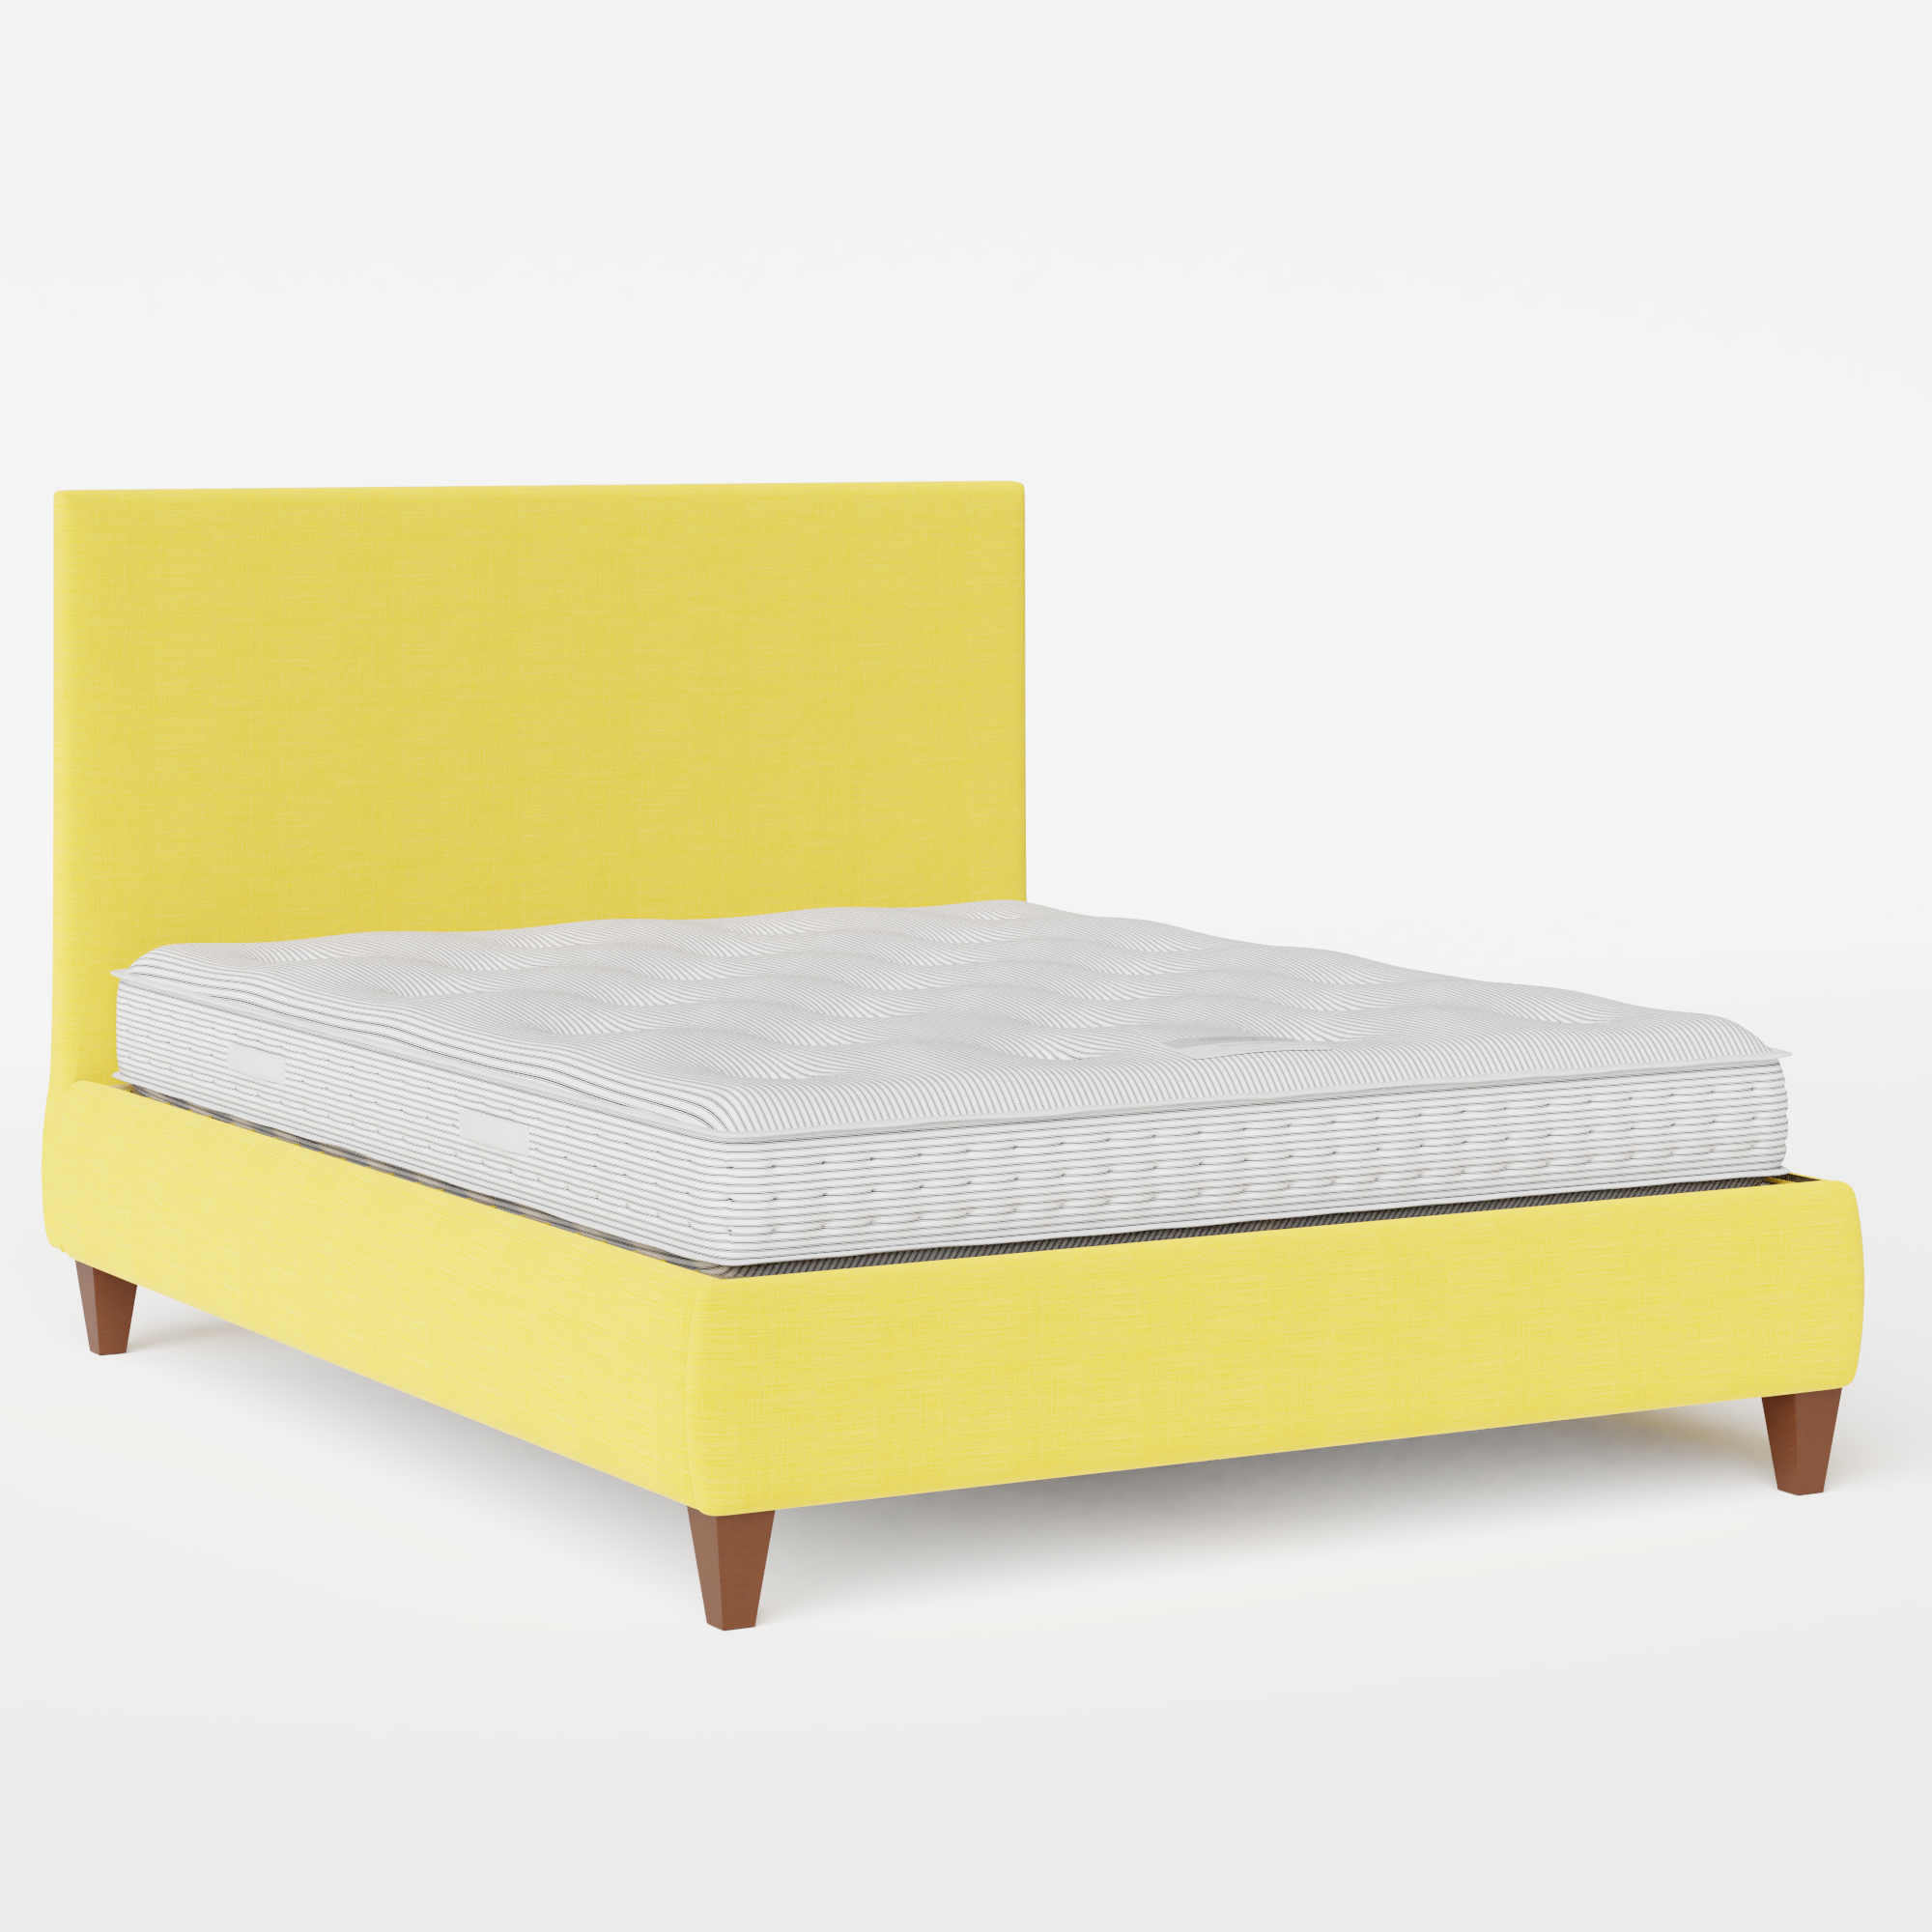 Yushan stoffen bed in sunflower